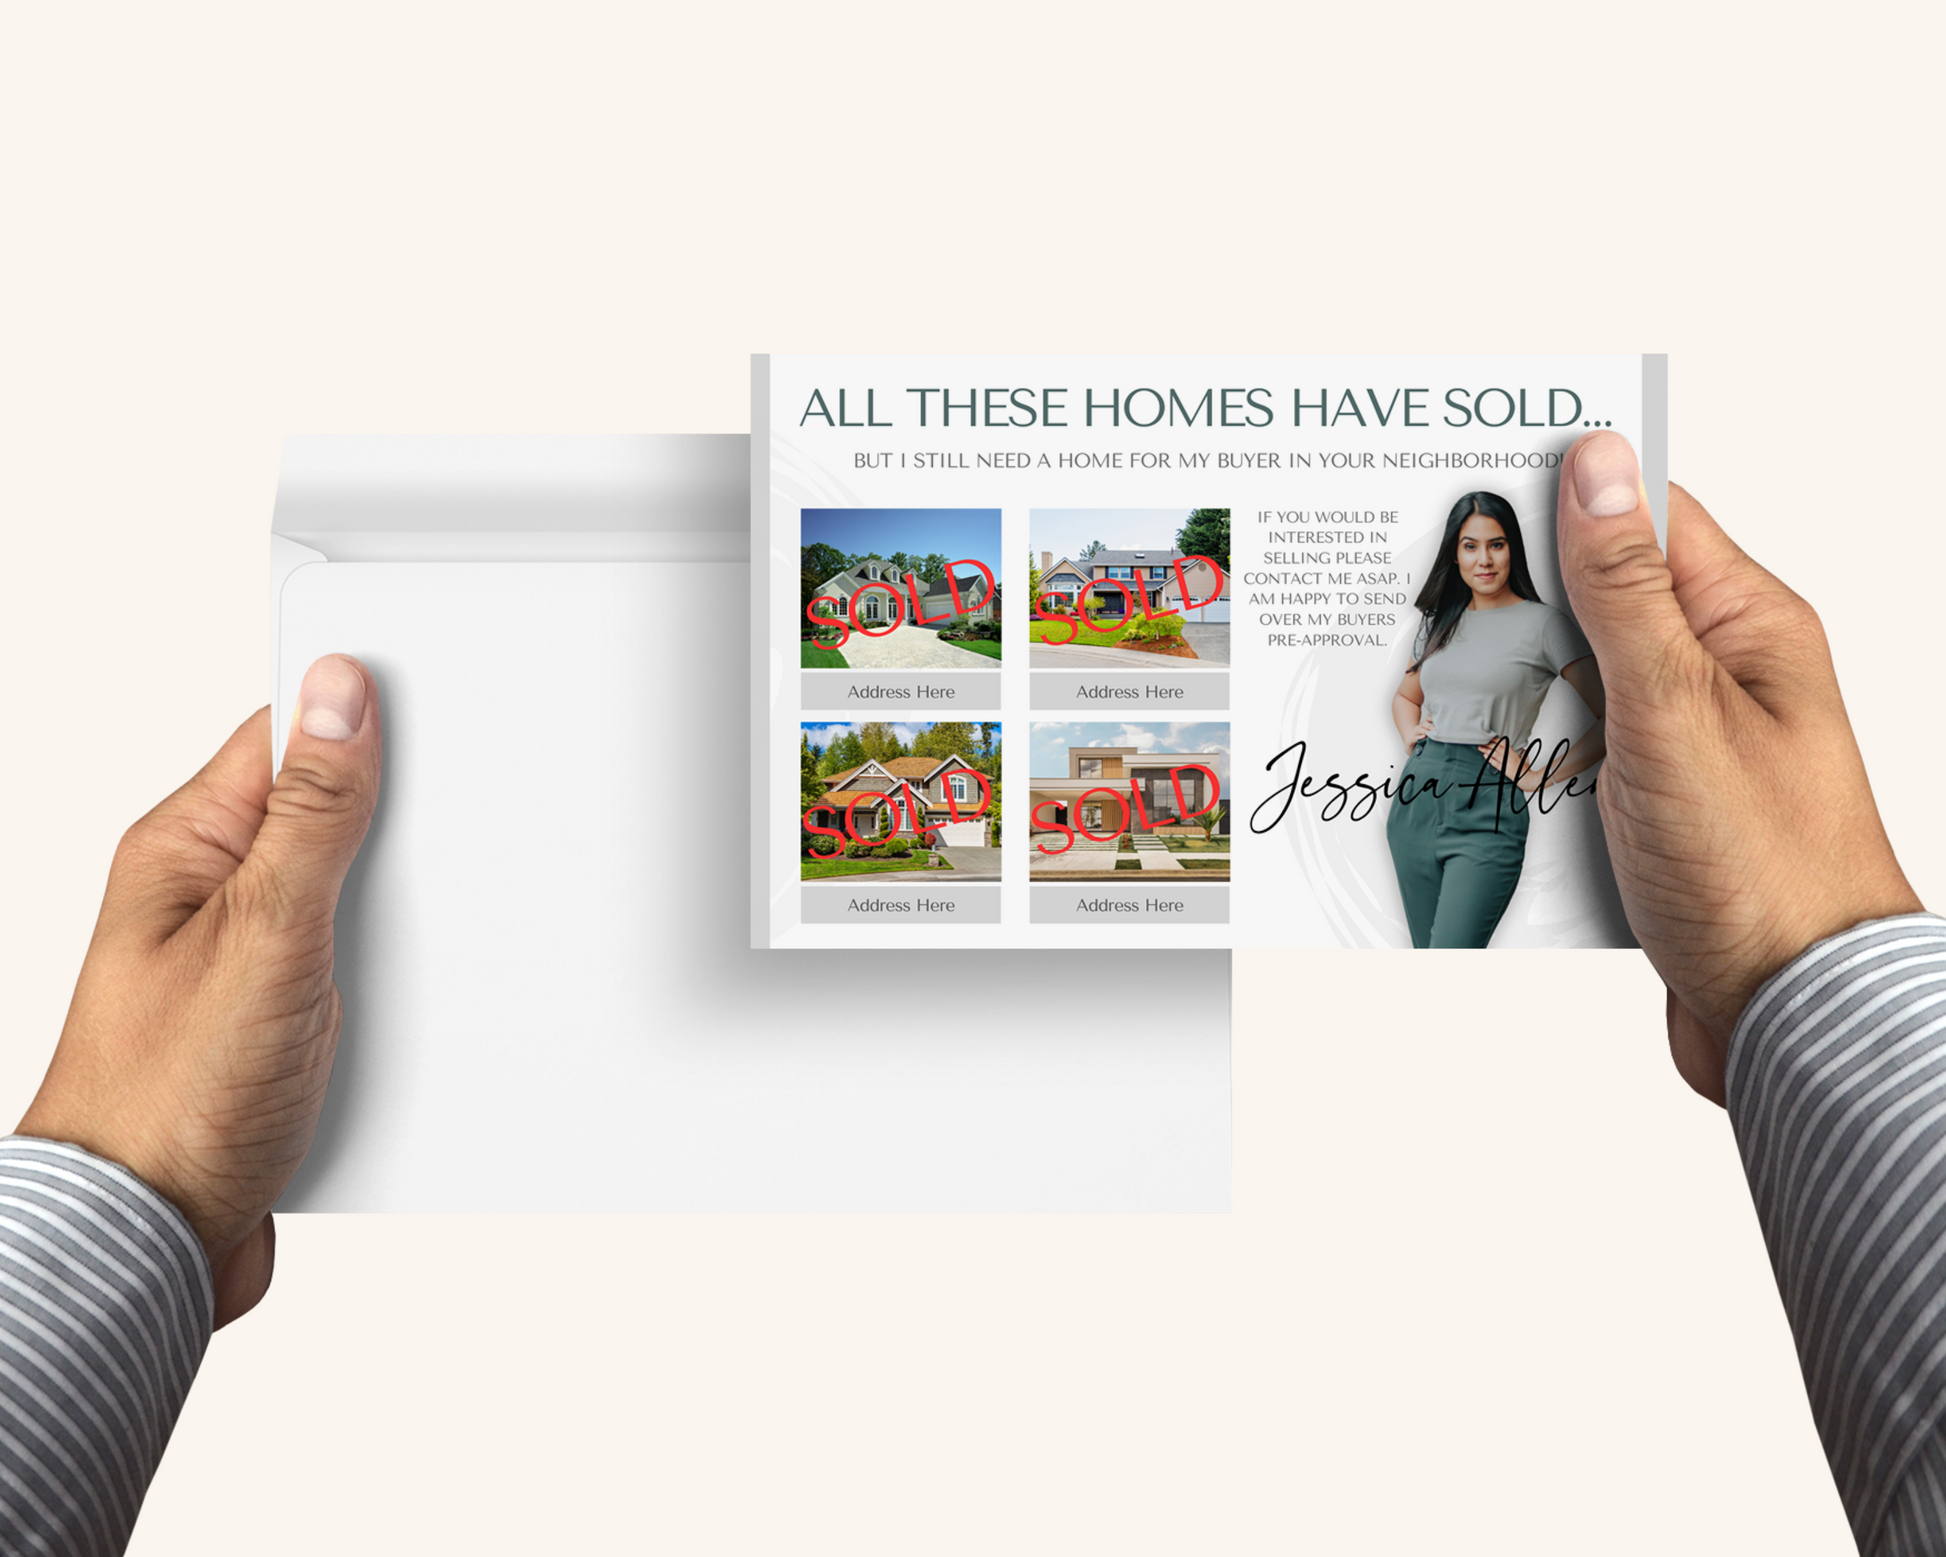 Real Estate Template – Farming Postcard for Sellers